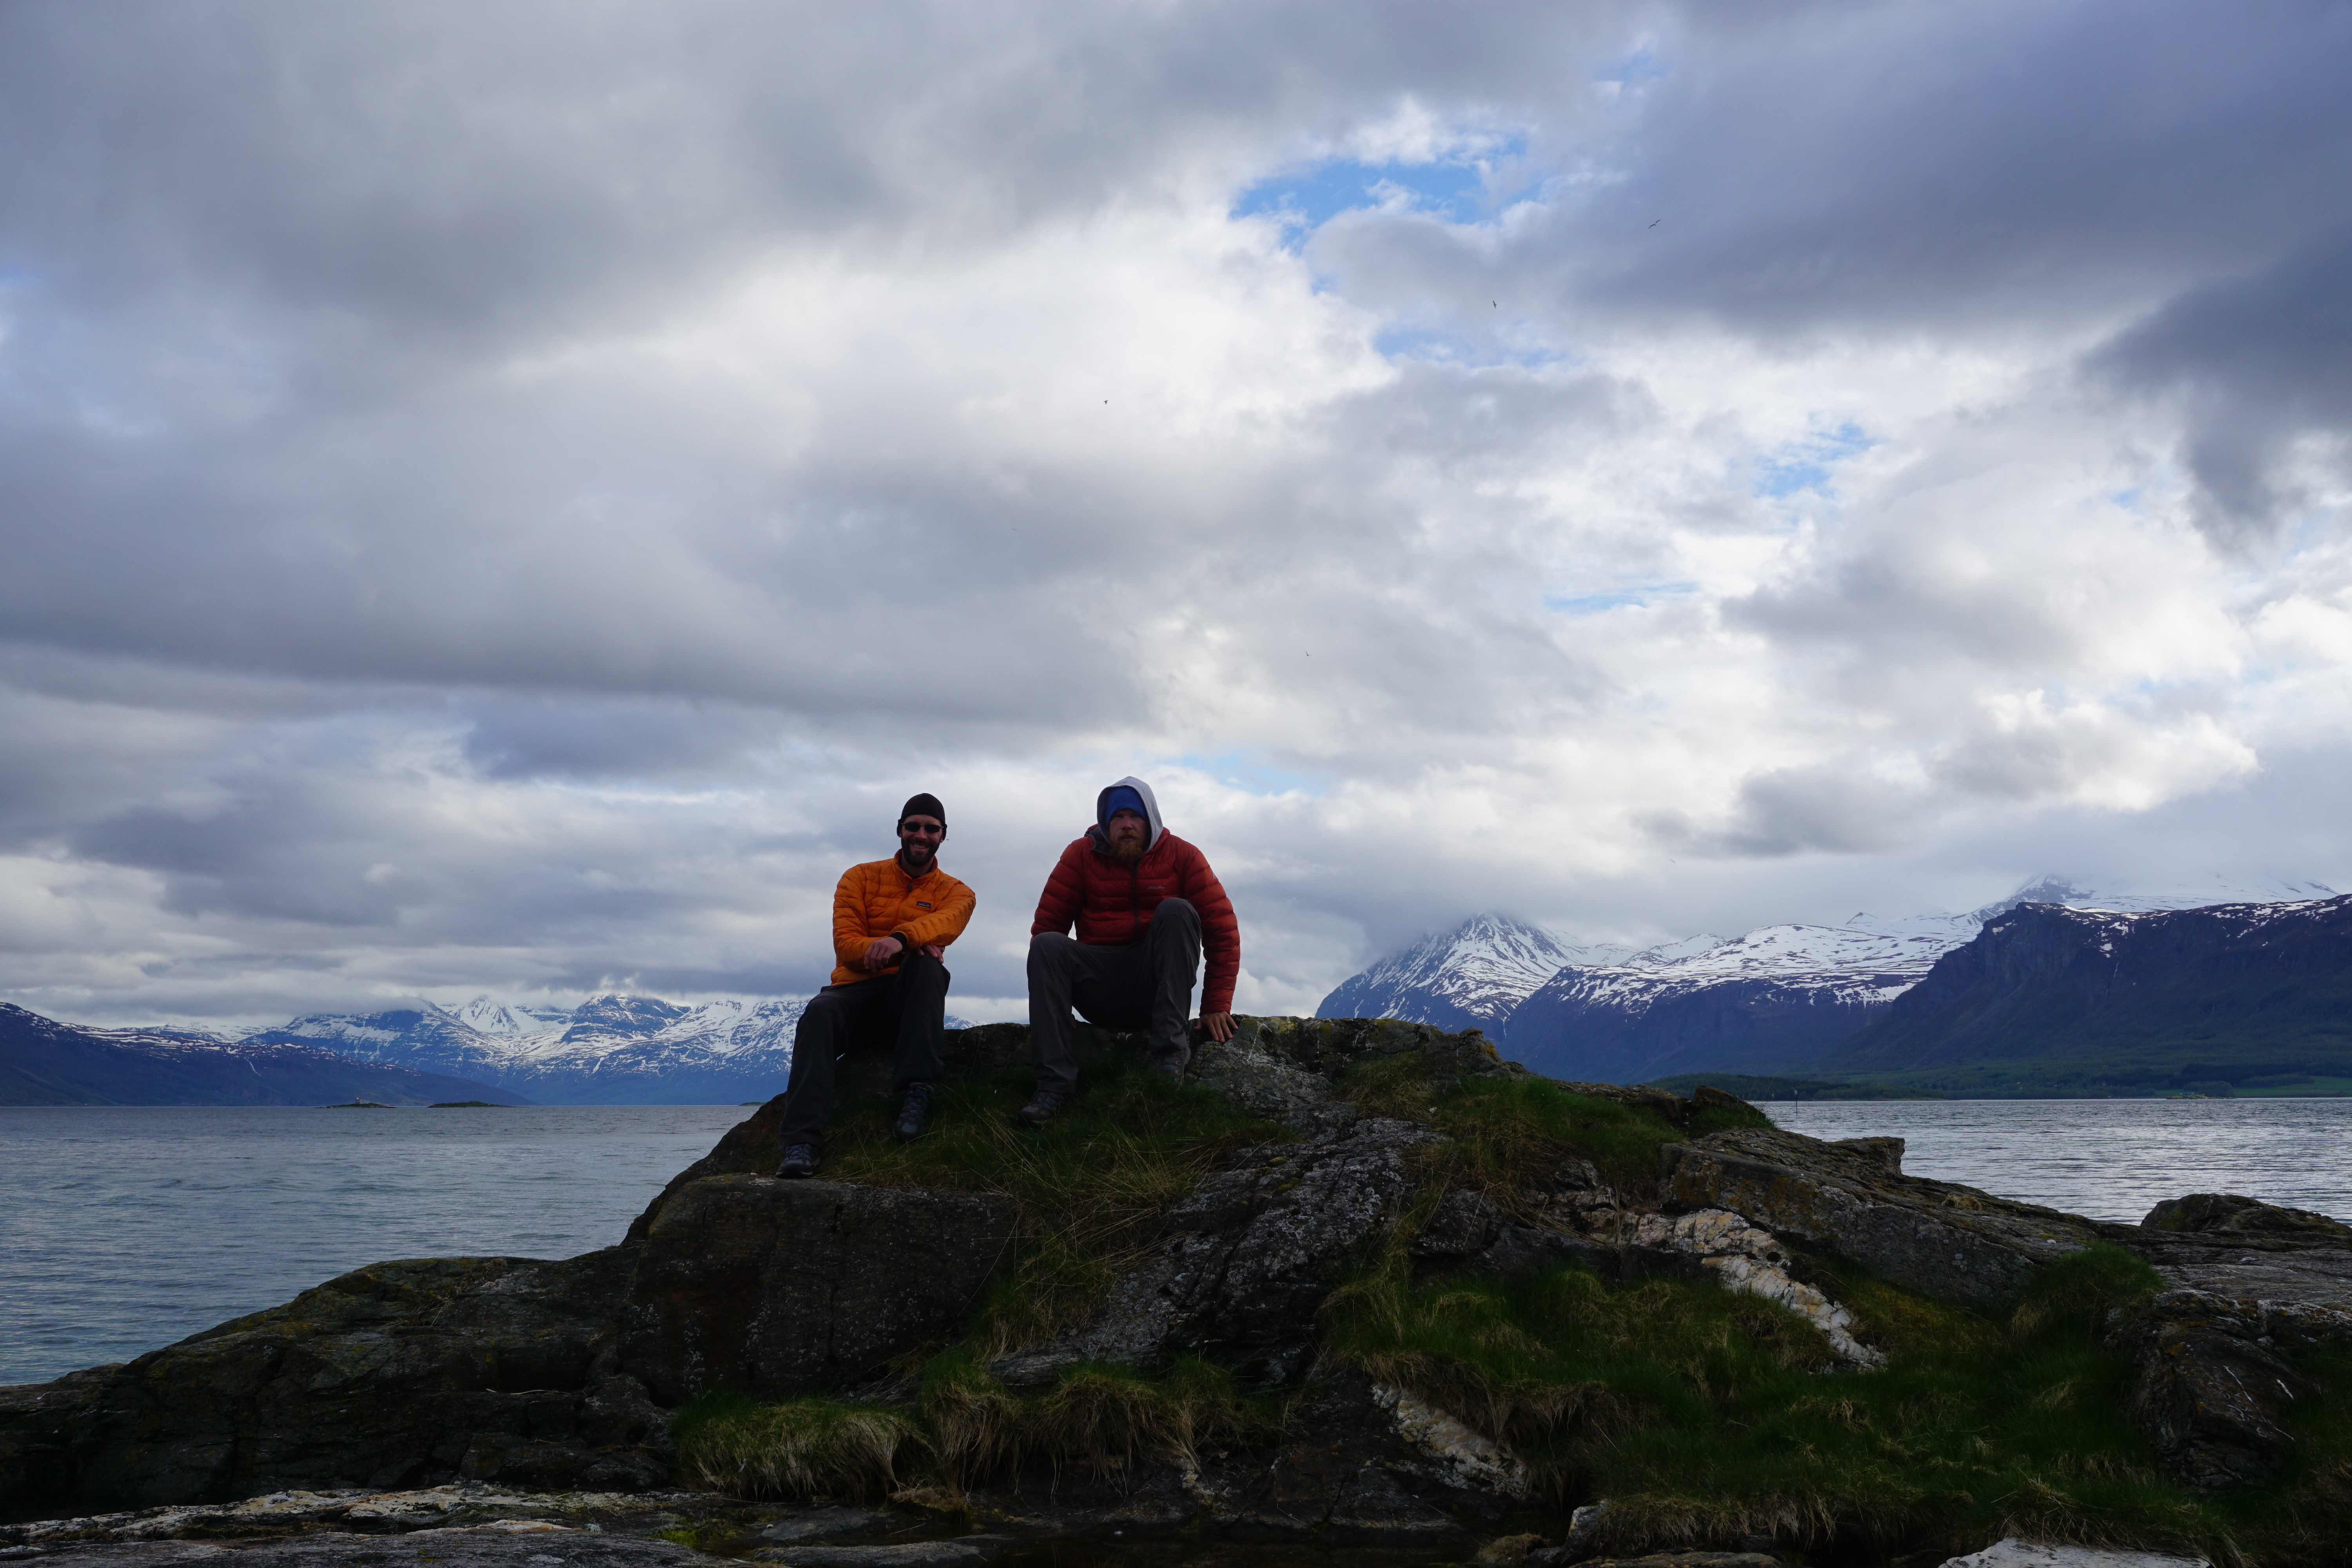 Hanging out on the shores and taking in the views of the Lyngen Alps